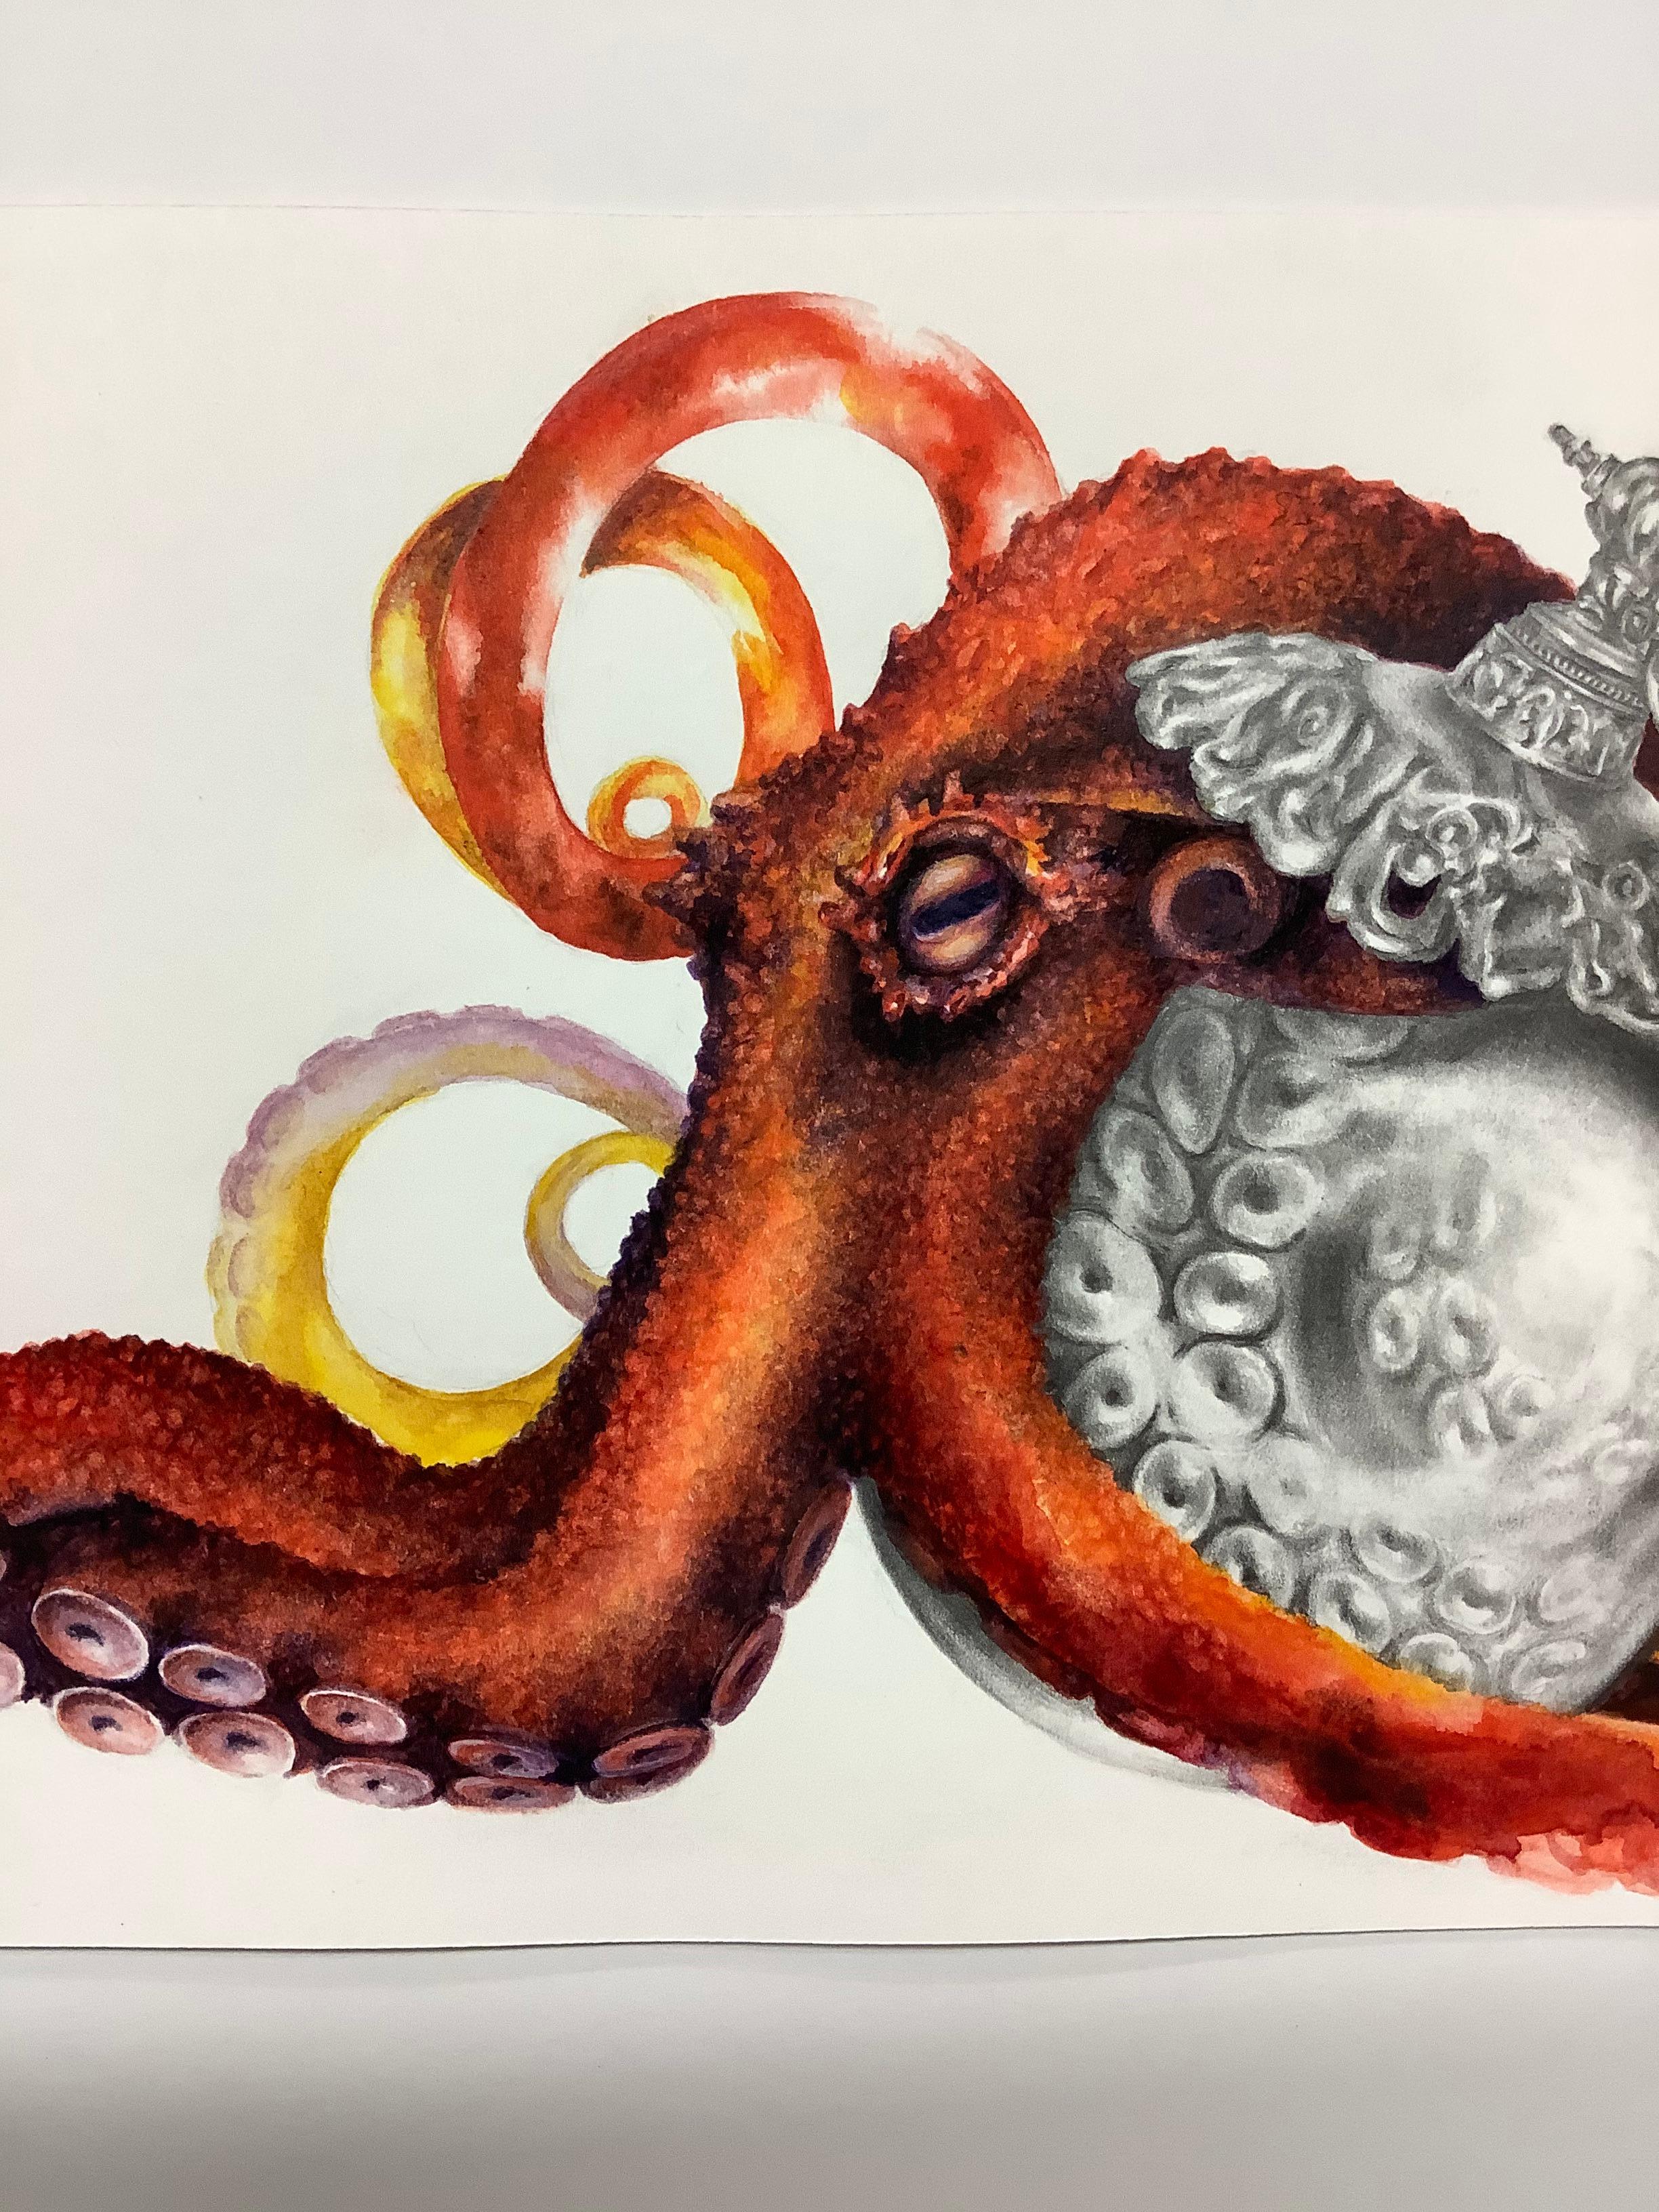 Perfume No. One, Drawing of Orange, Red Octopus and Perfume Bottle on White - Beige Animal Art by Francine Fox